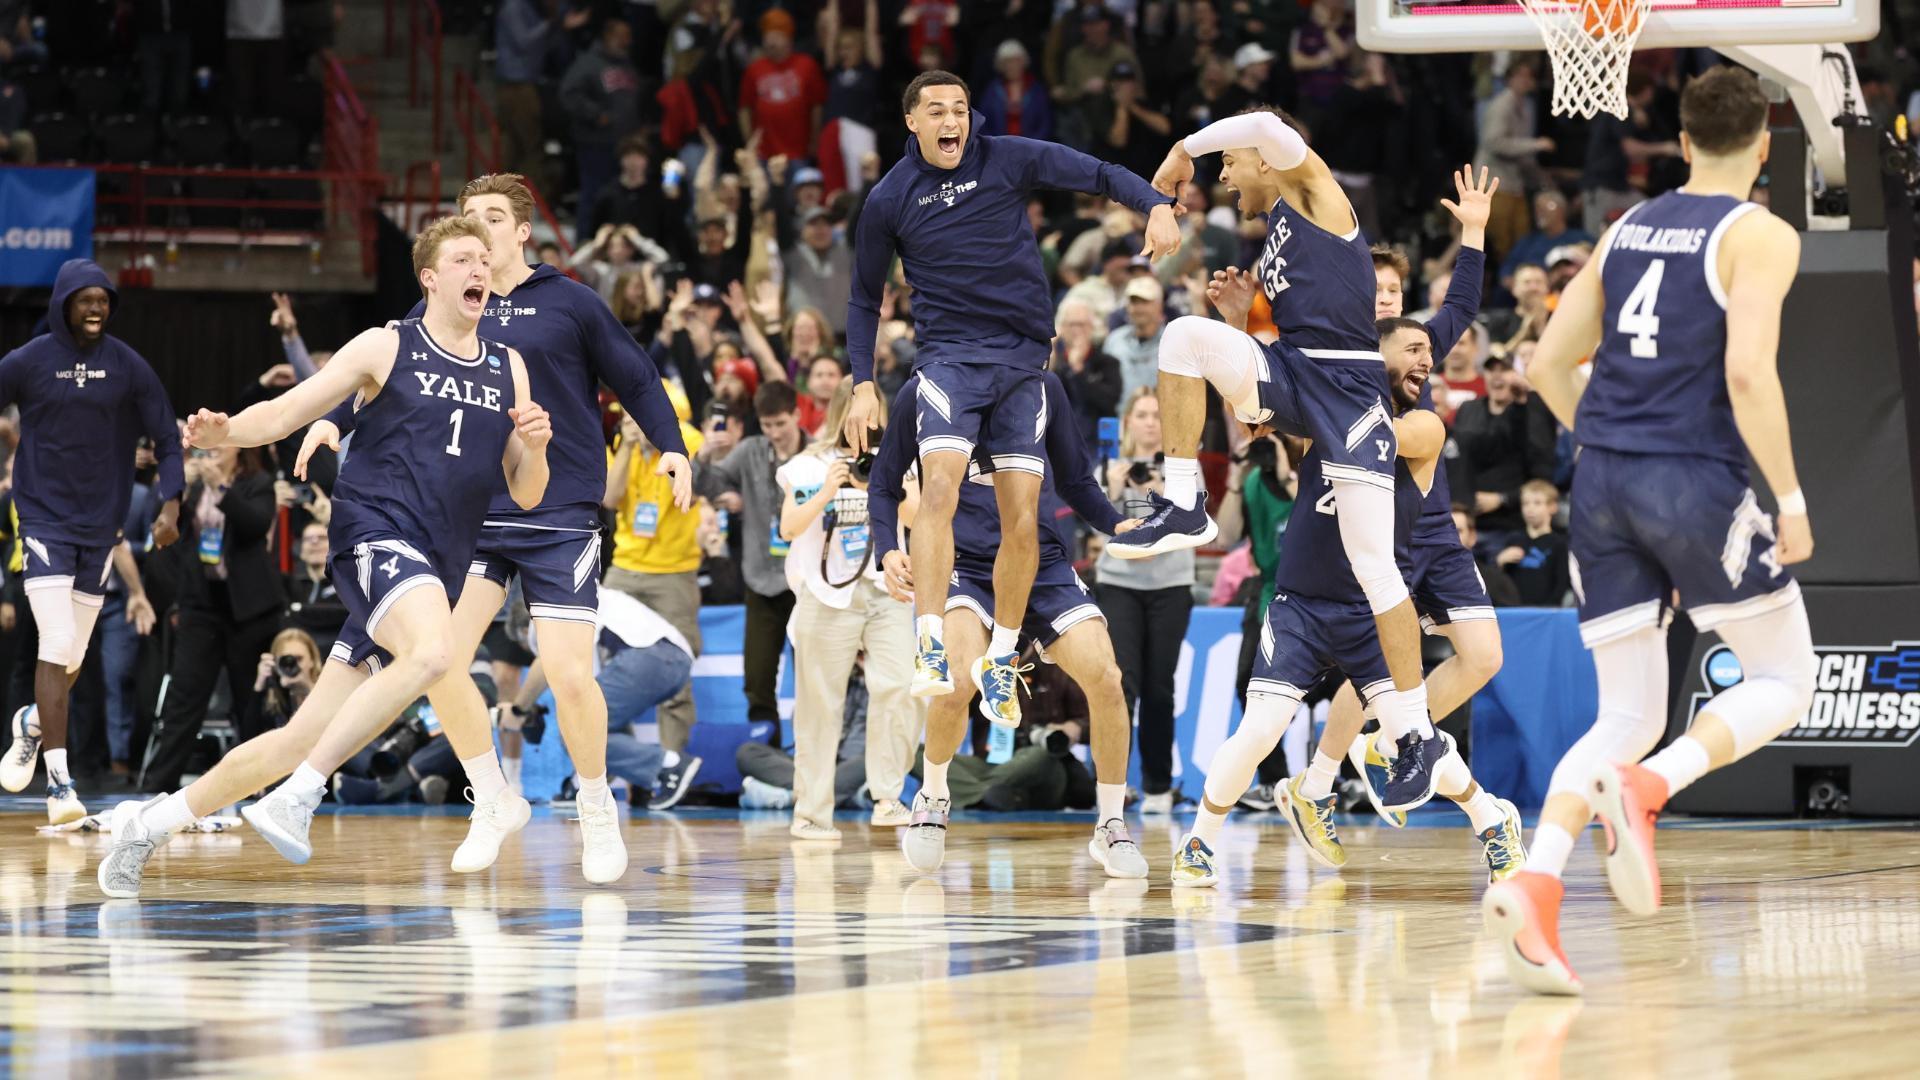 Yale completes upset after chaotic final sequence